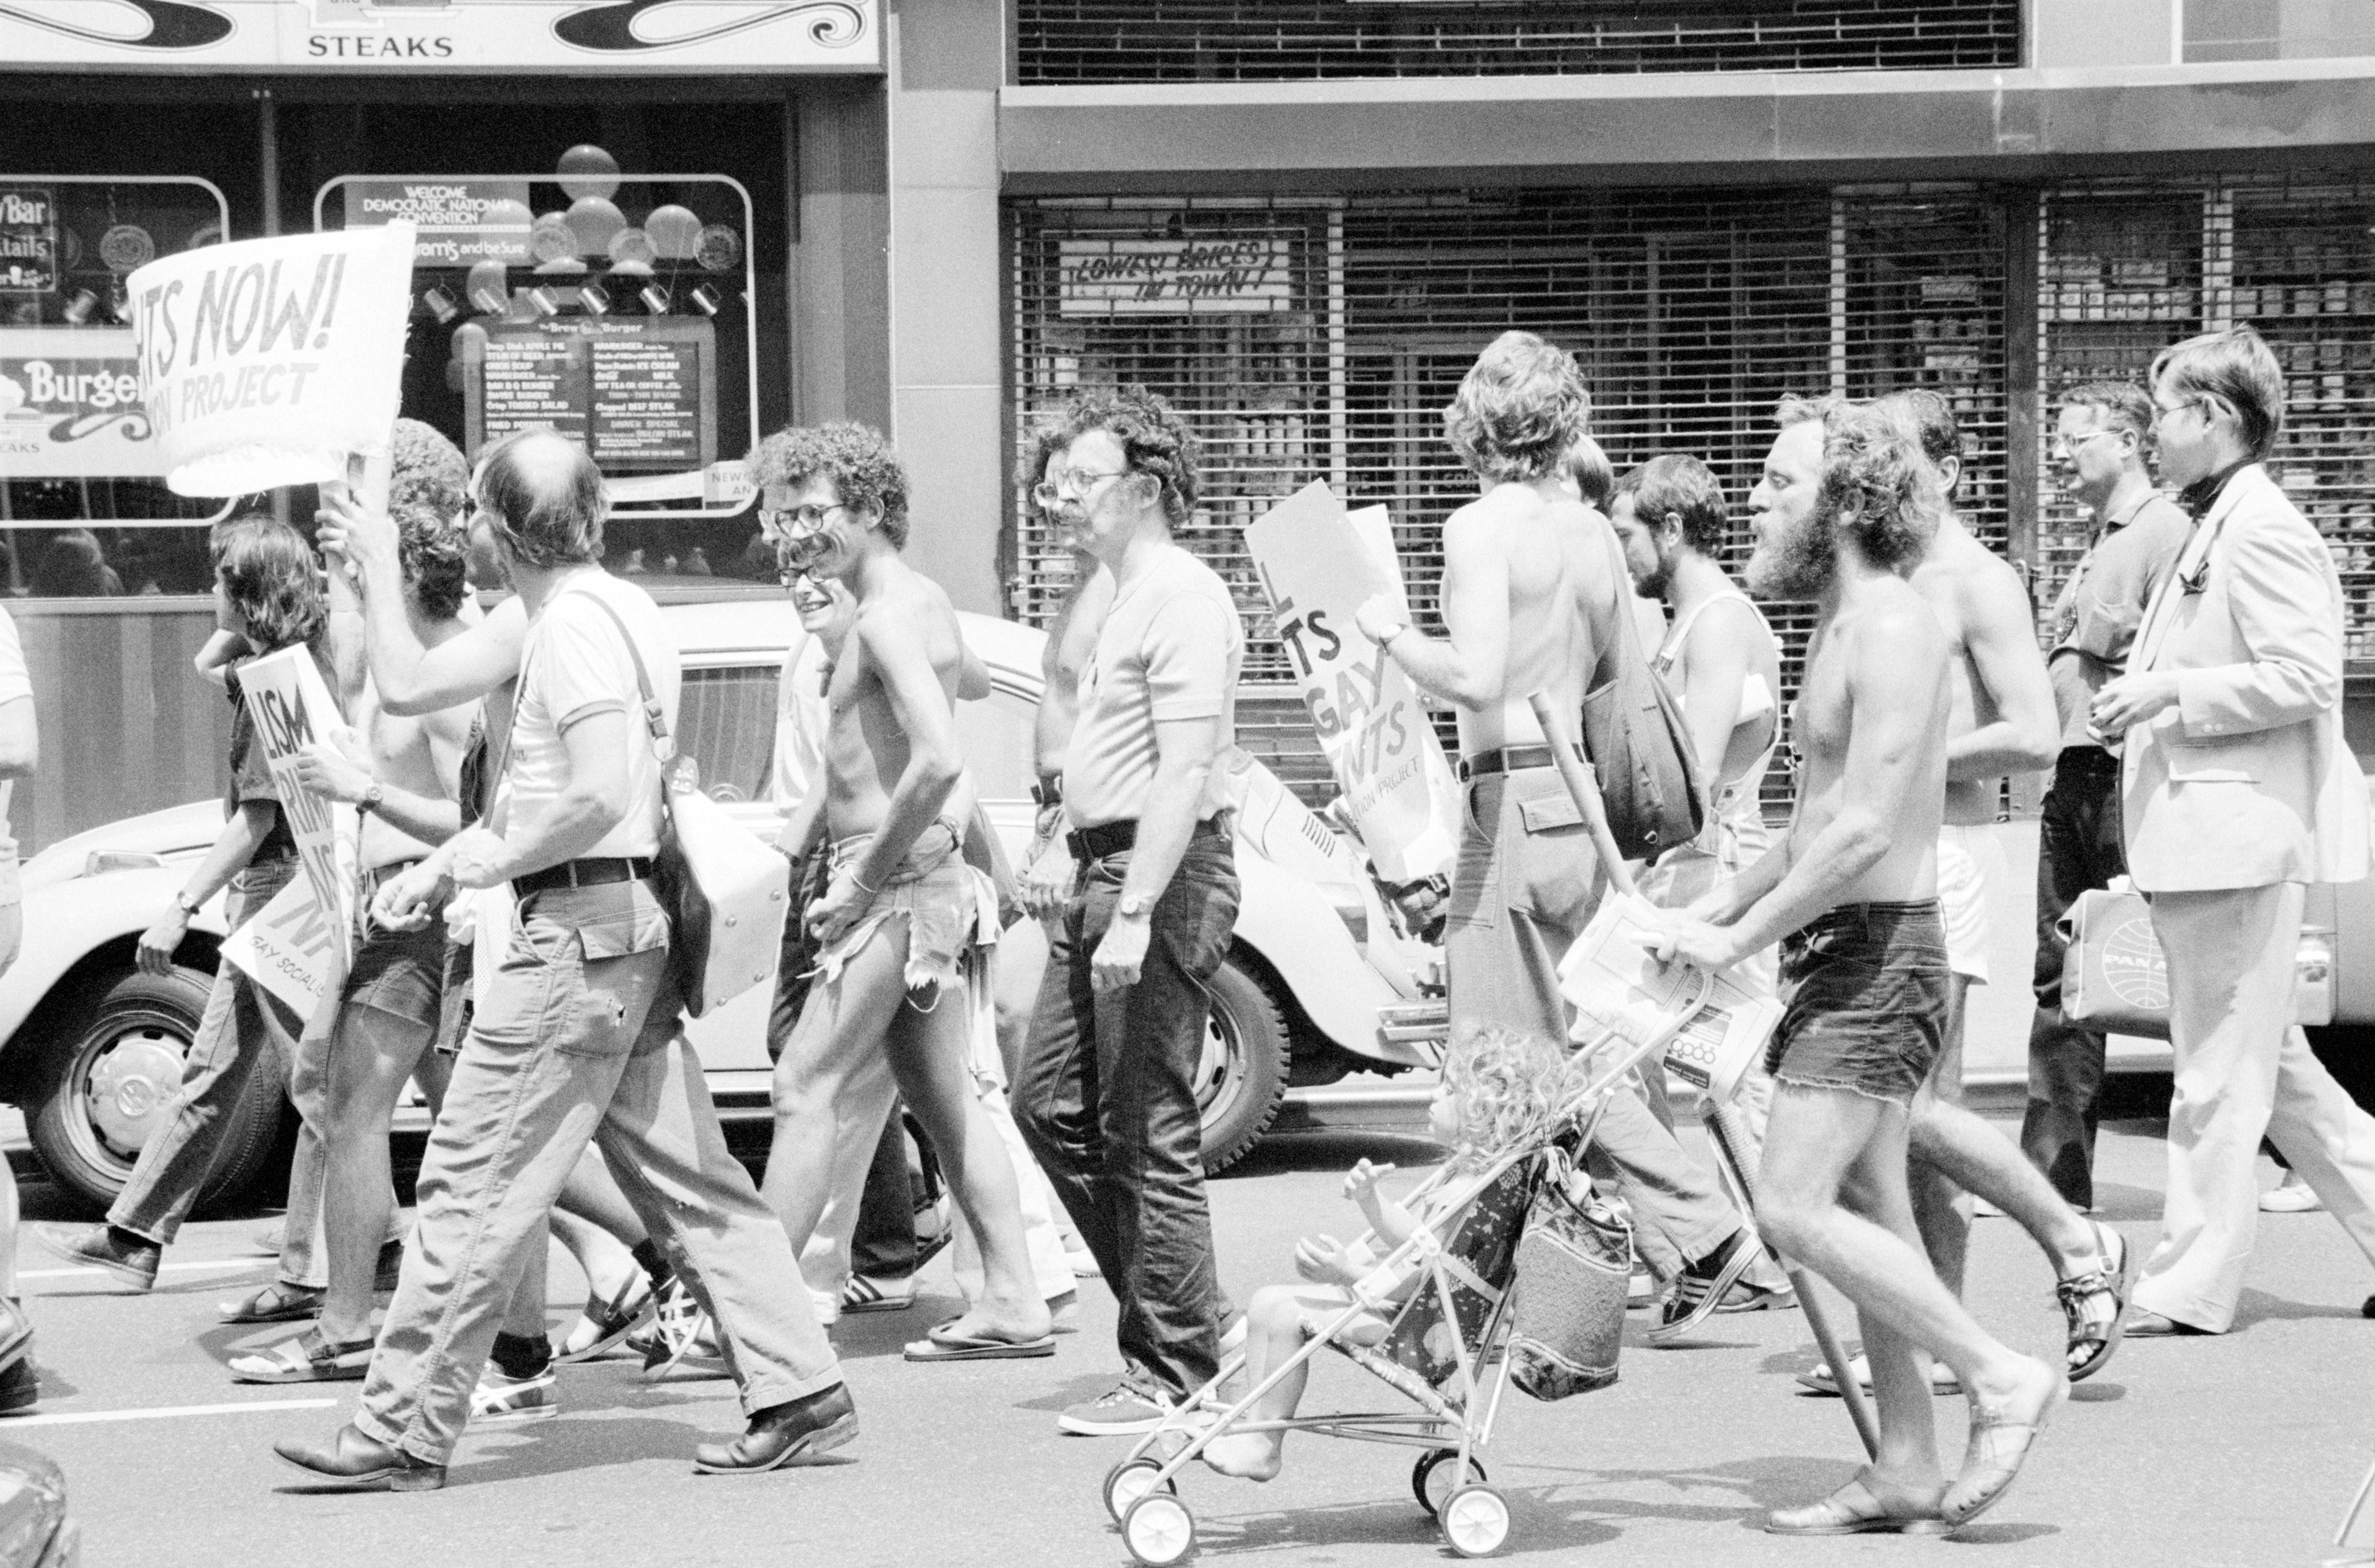 A group of men march during the 1976 DNC